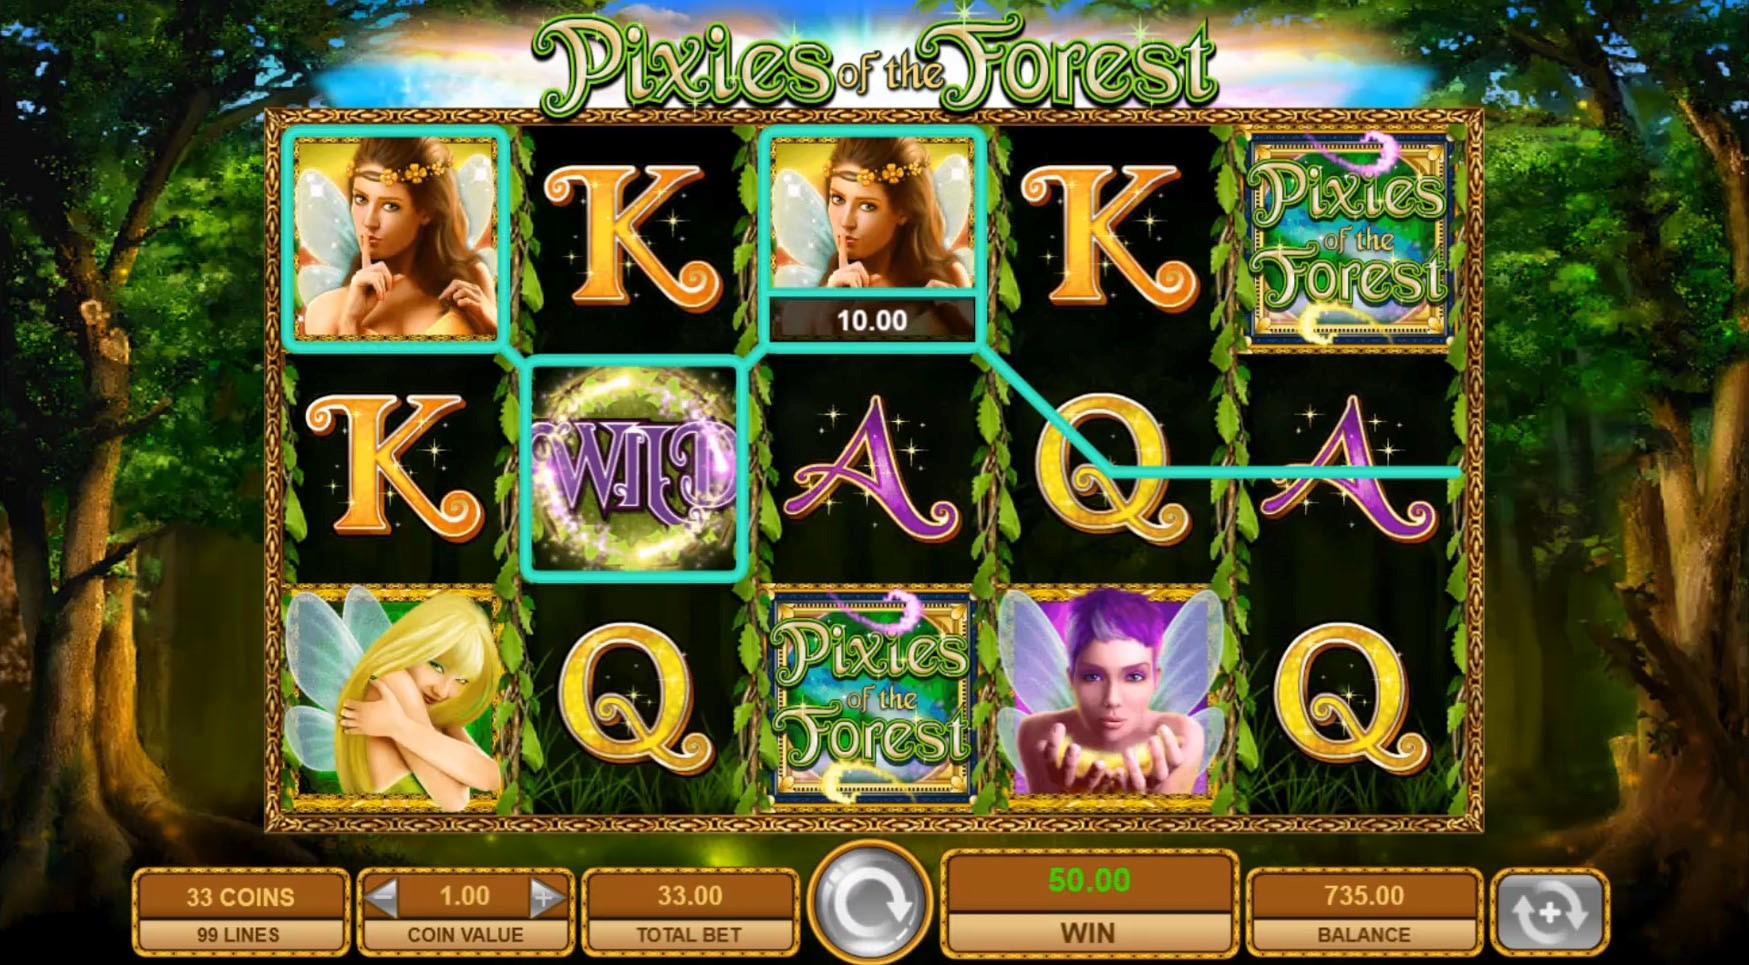 A base game win involving a Wild symbol during the Pixies of the Forest slot online